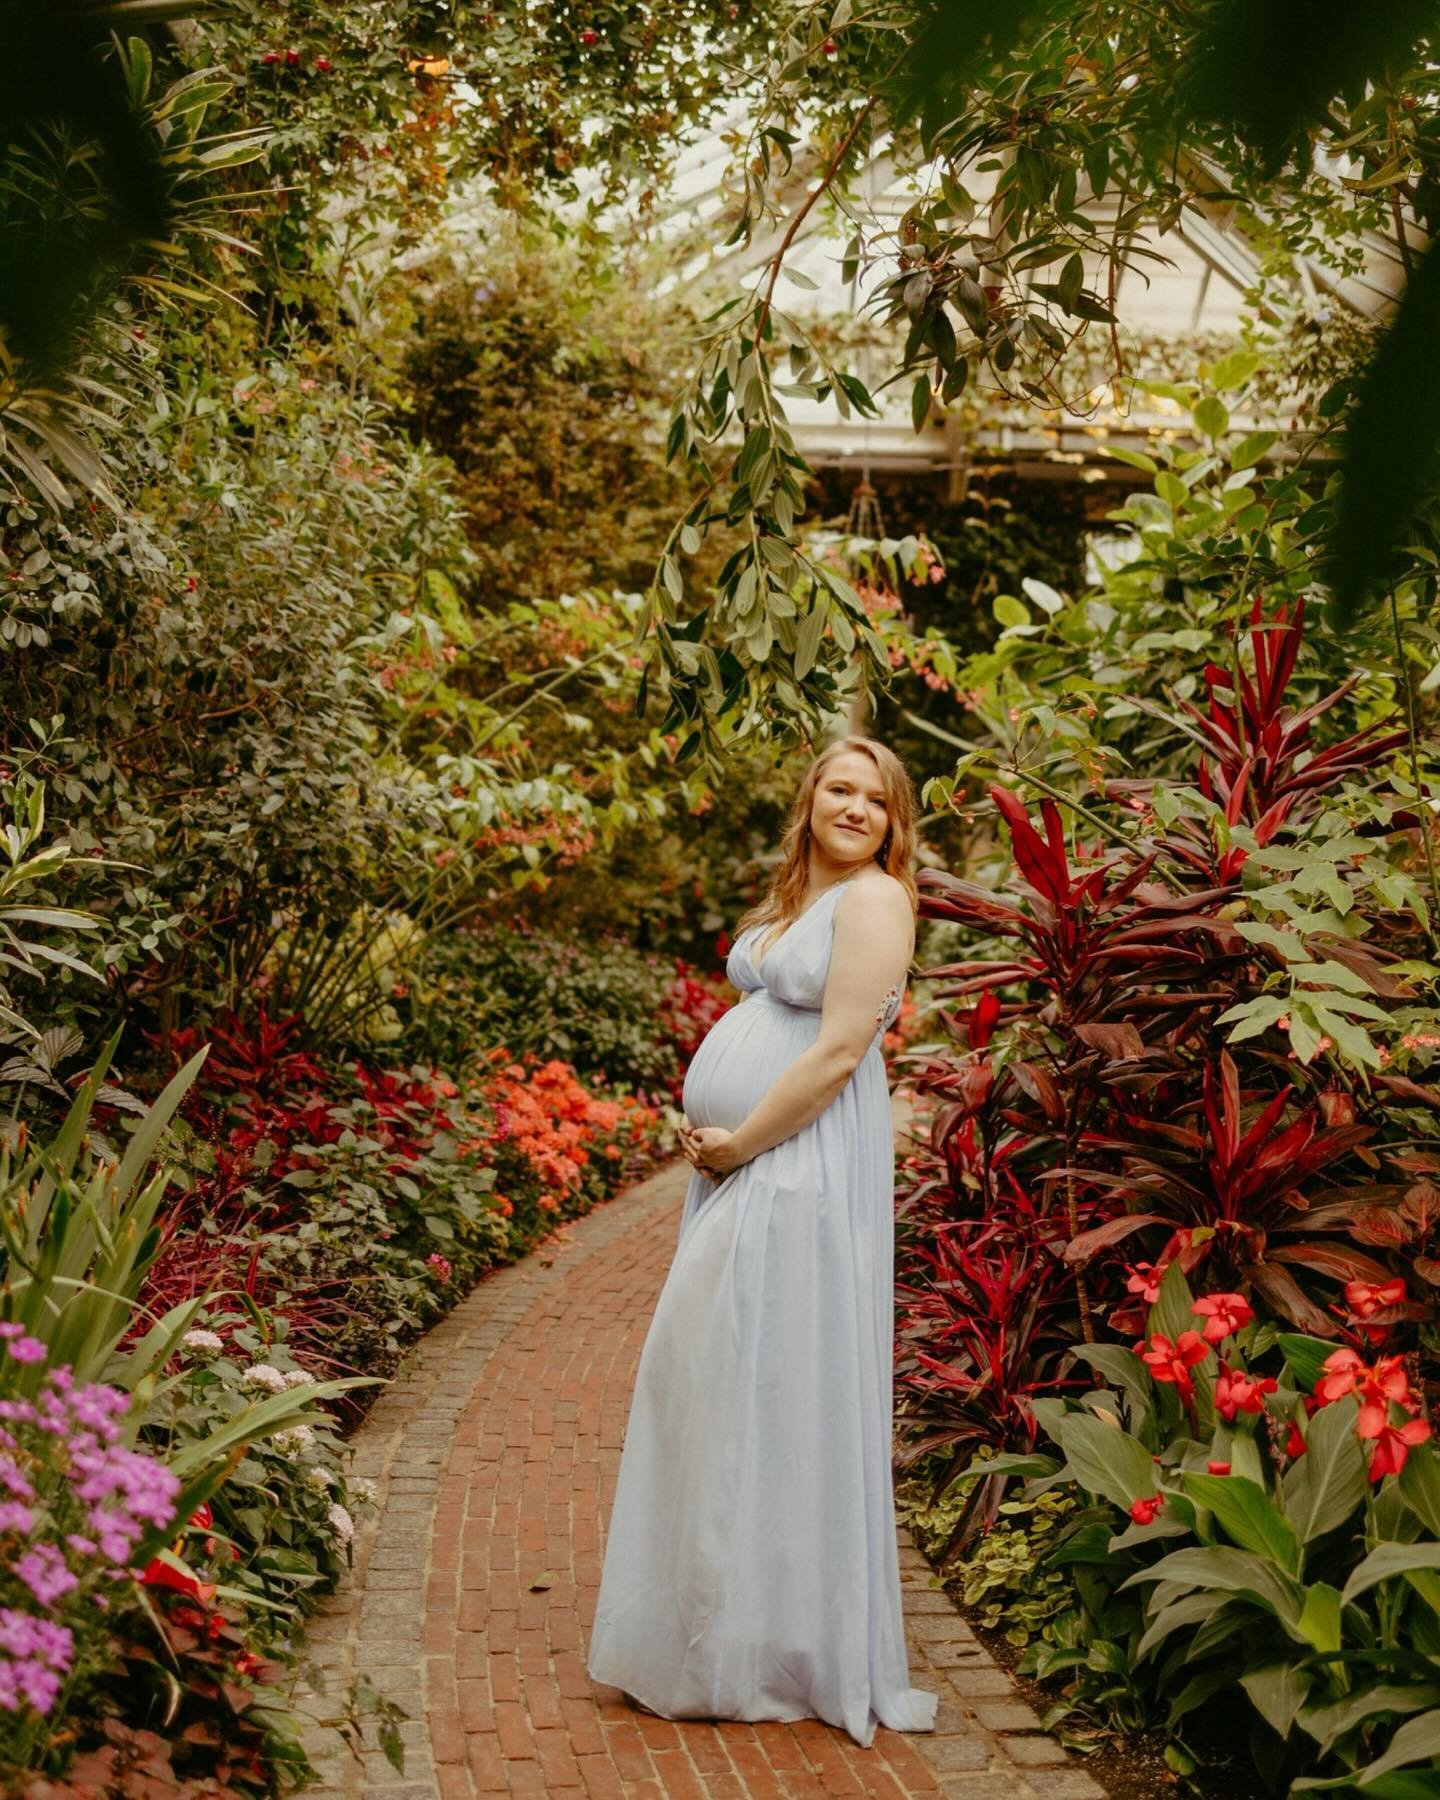 give me alllllll of the spring garden sessions please ⛲️✨🪻
.
this beautiful spring weather has me reminiscing on this beautiful garden maternity session 💜